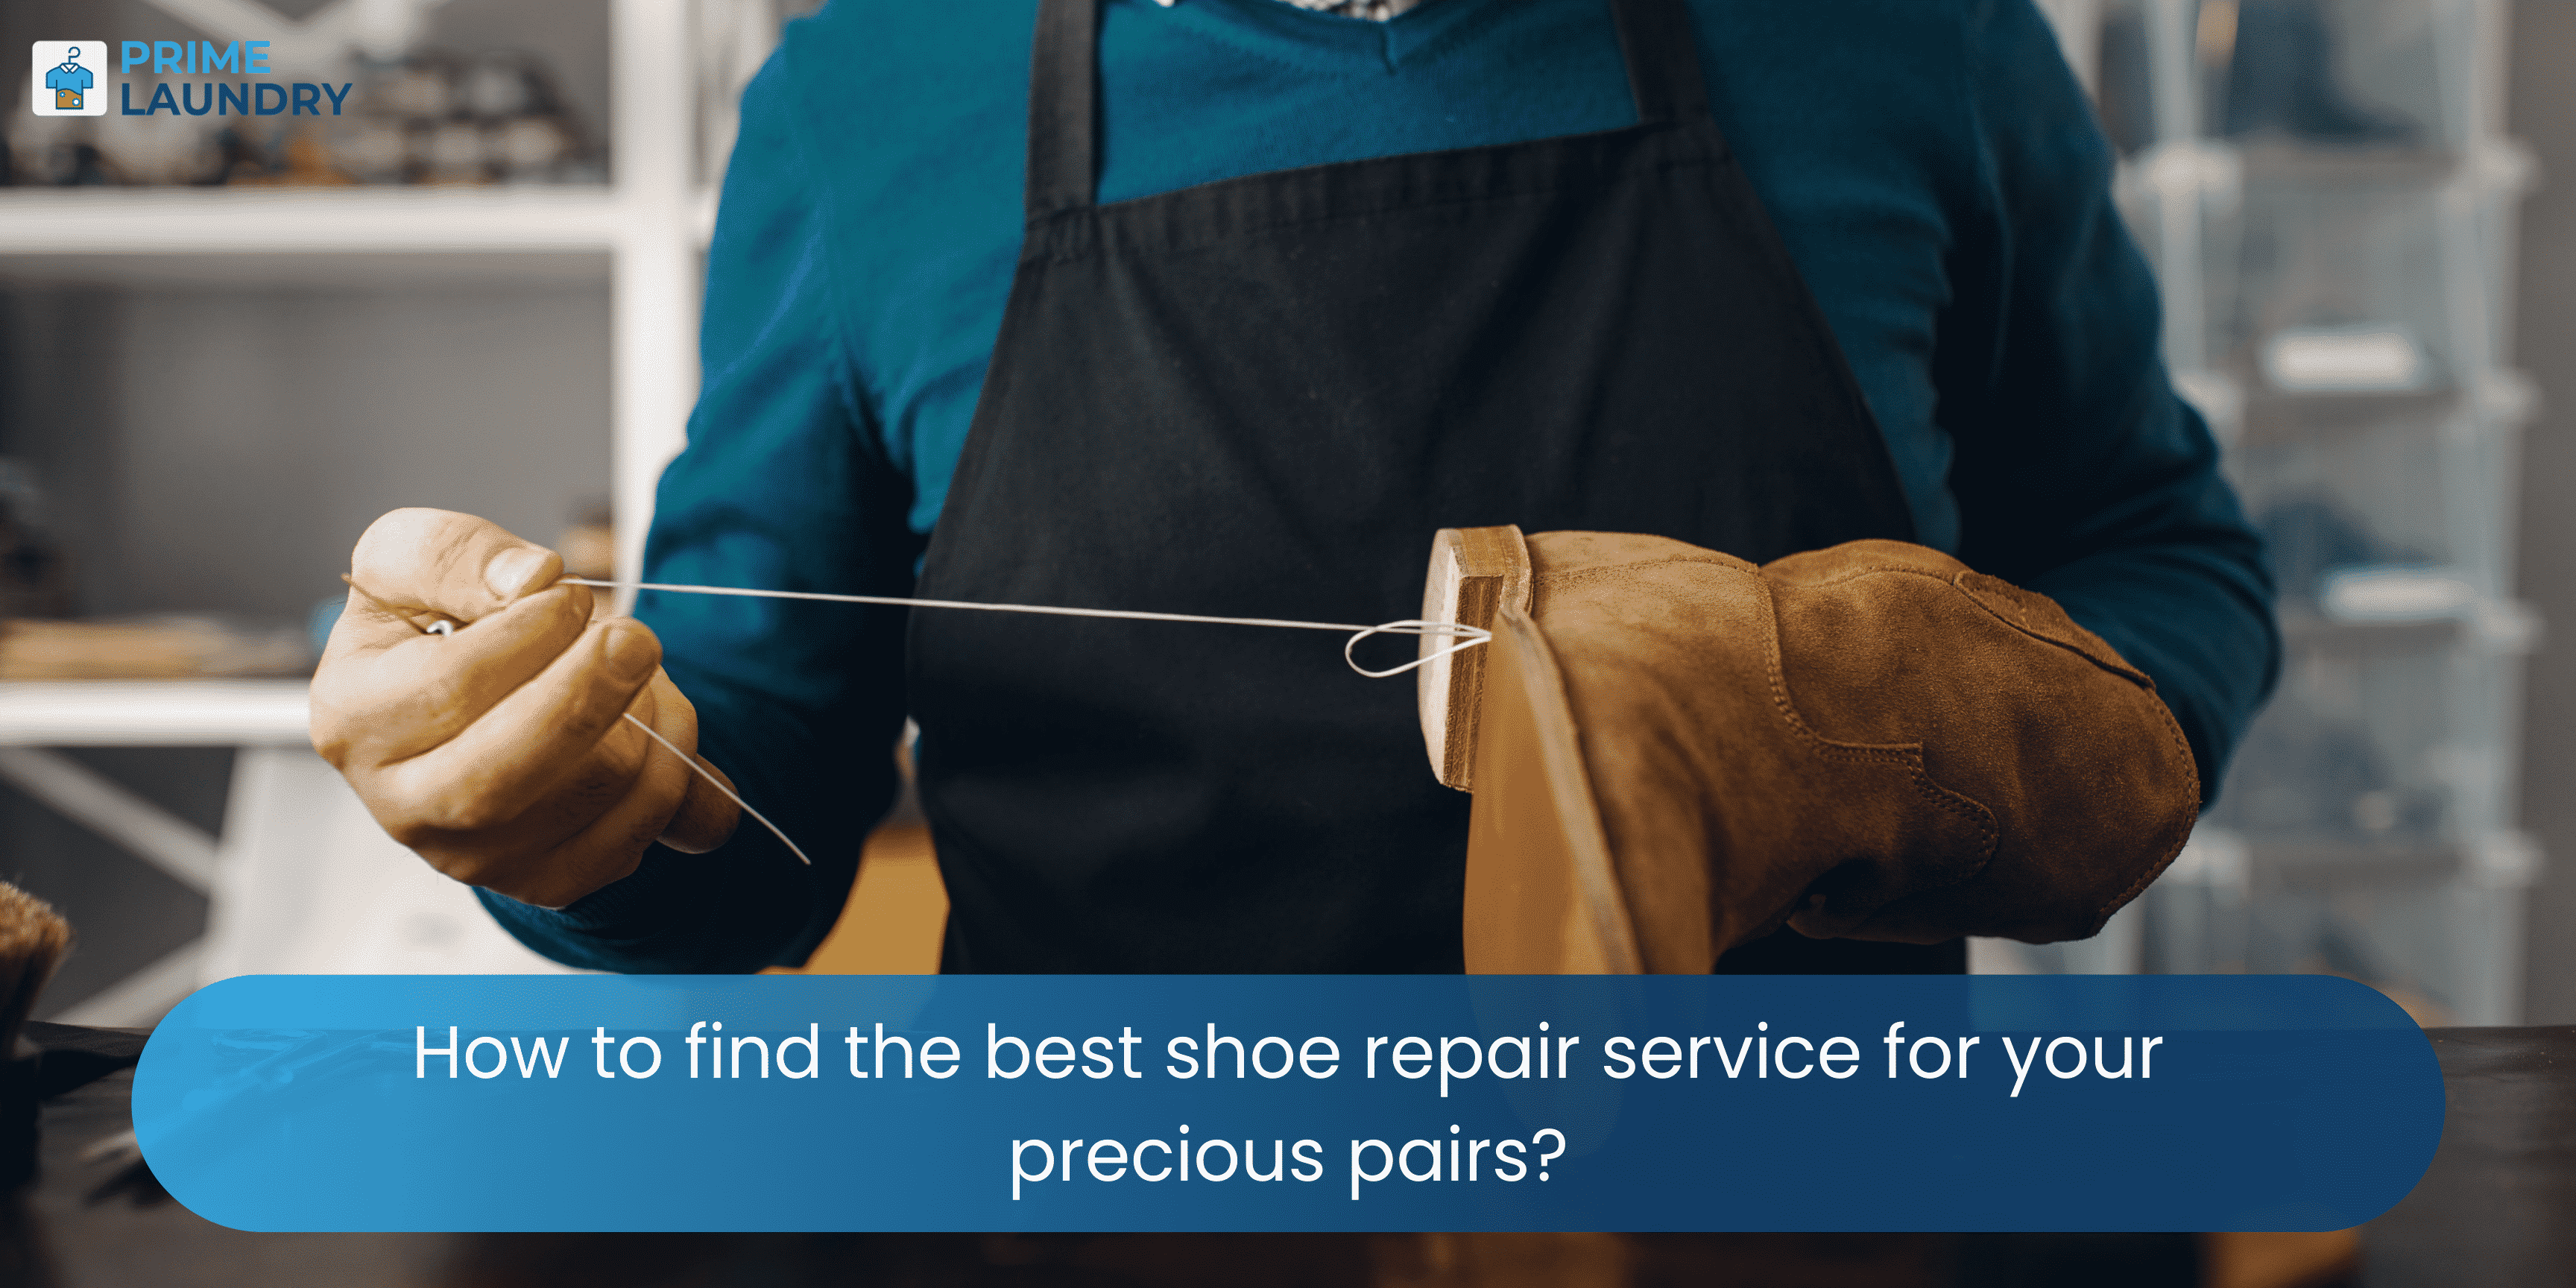 How to find the best shoe repair service for your precious pairs?